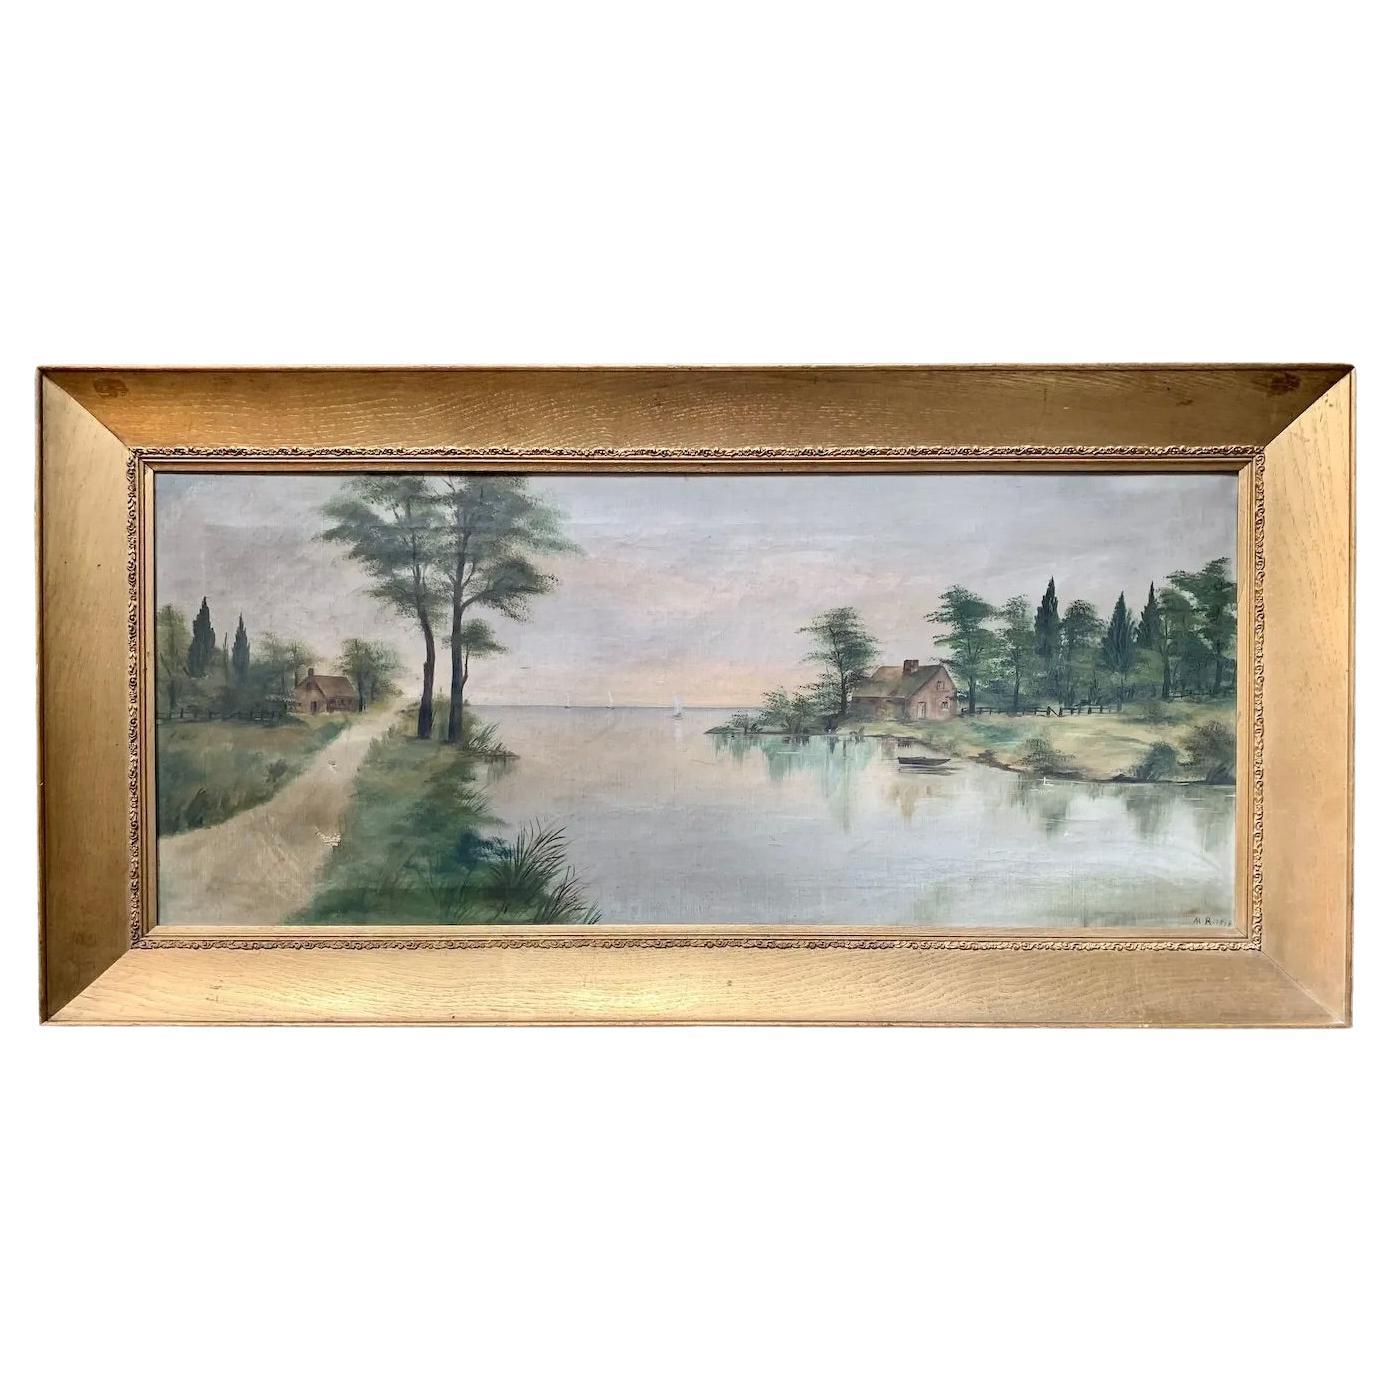 Early 19th Century Landscape “Cottage Retreat” Oil on Canvas